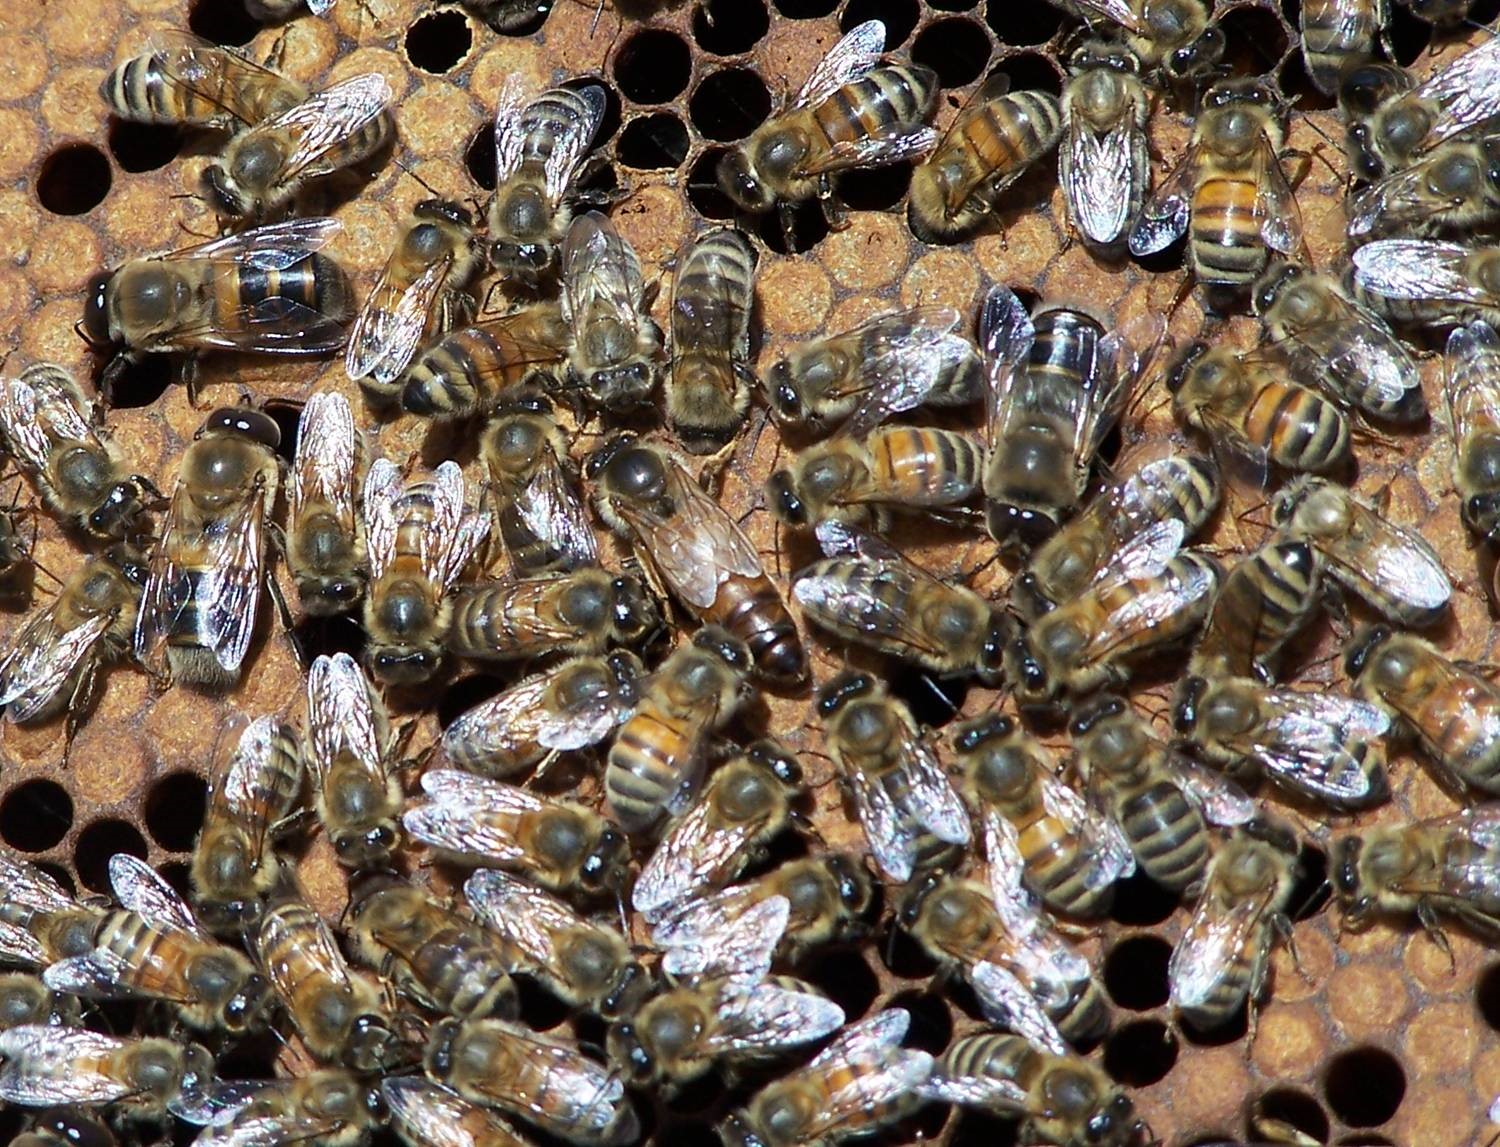 CATCH THE BUZZ – “There is a Protein in Royal Jelly that Causes Bee Stem Cells to Renew Themselves, So Queen Bees are Bigger and Contain More Cells Than Worker Bees”